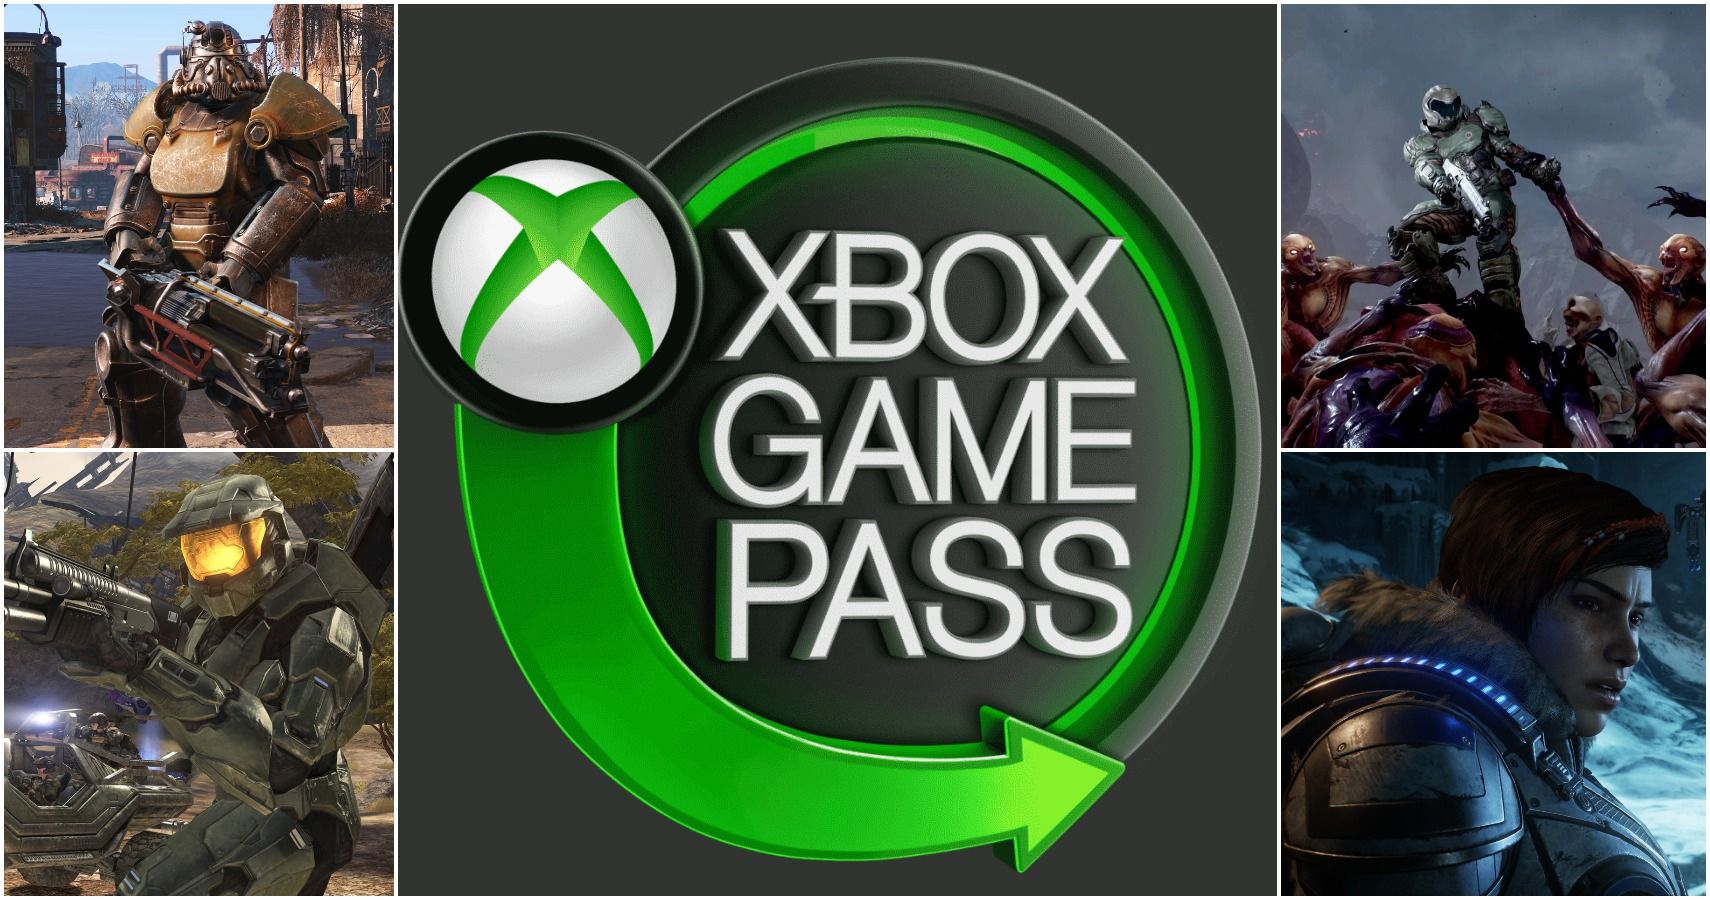 best games on game pass